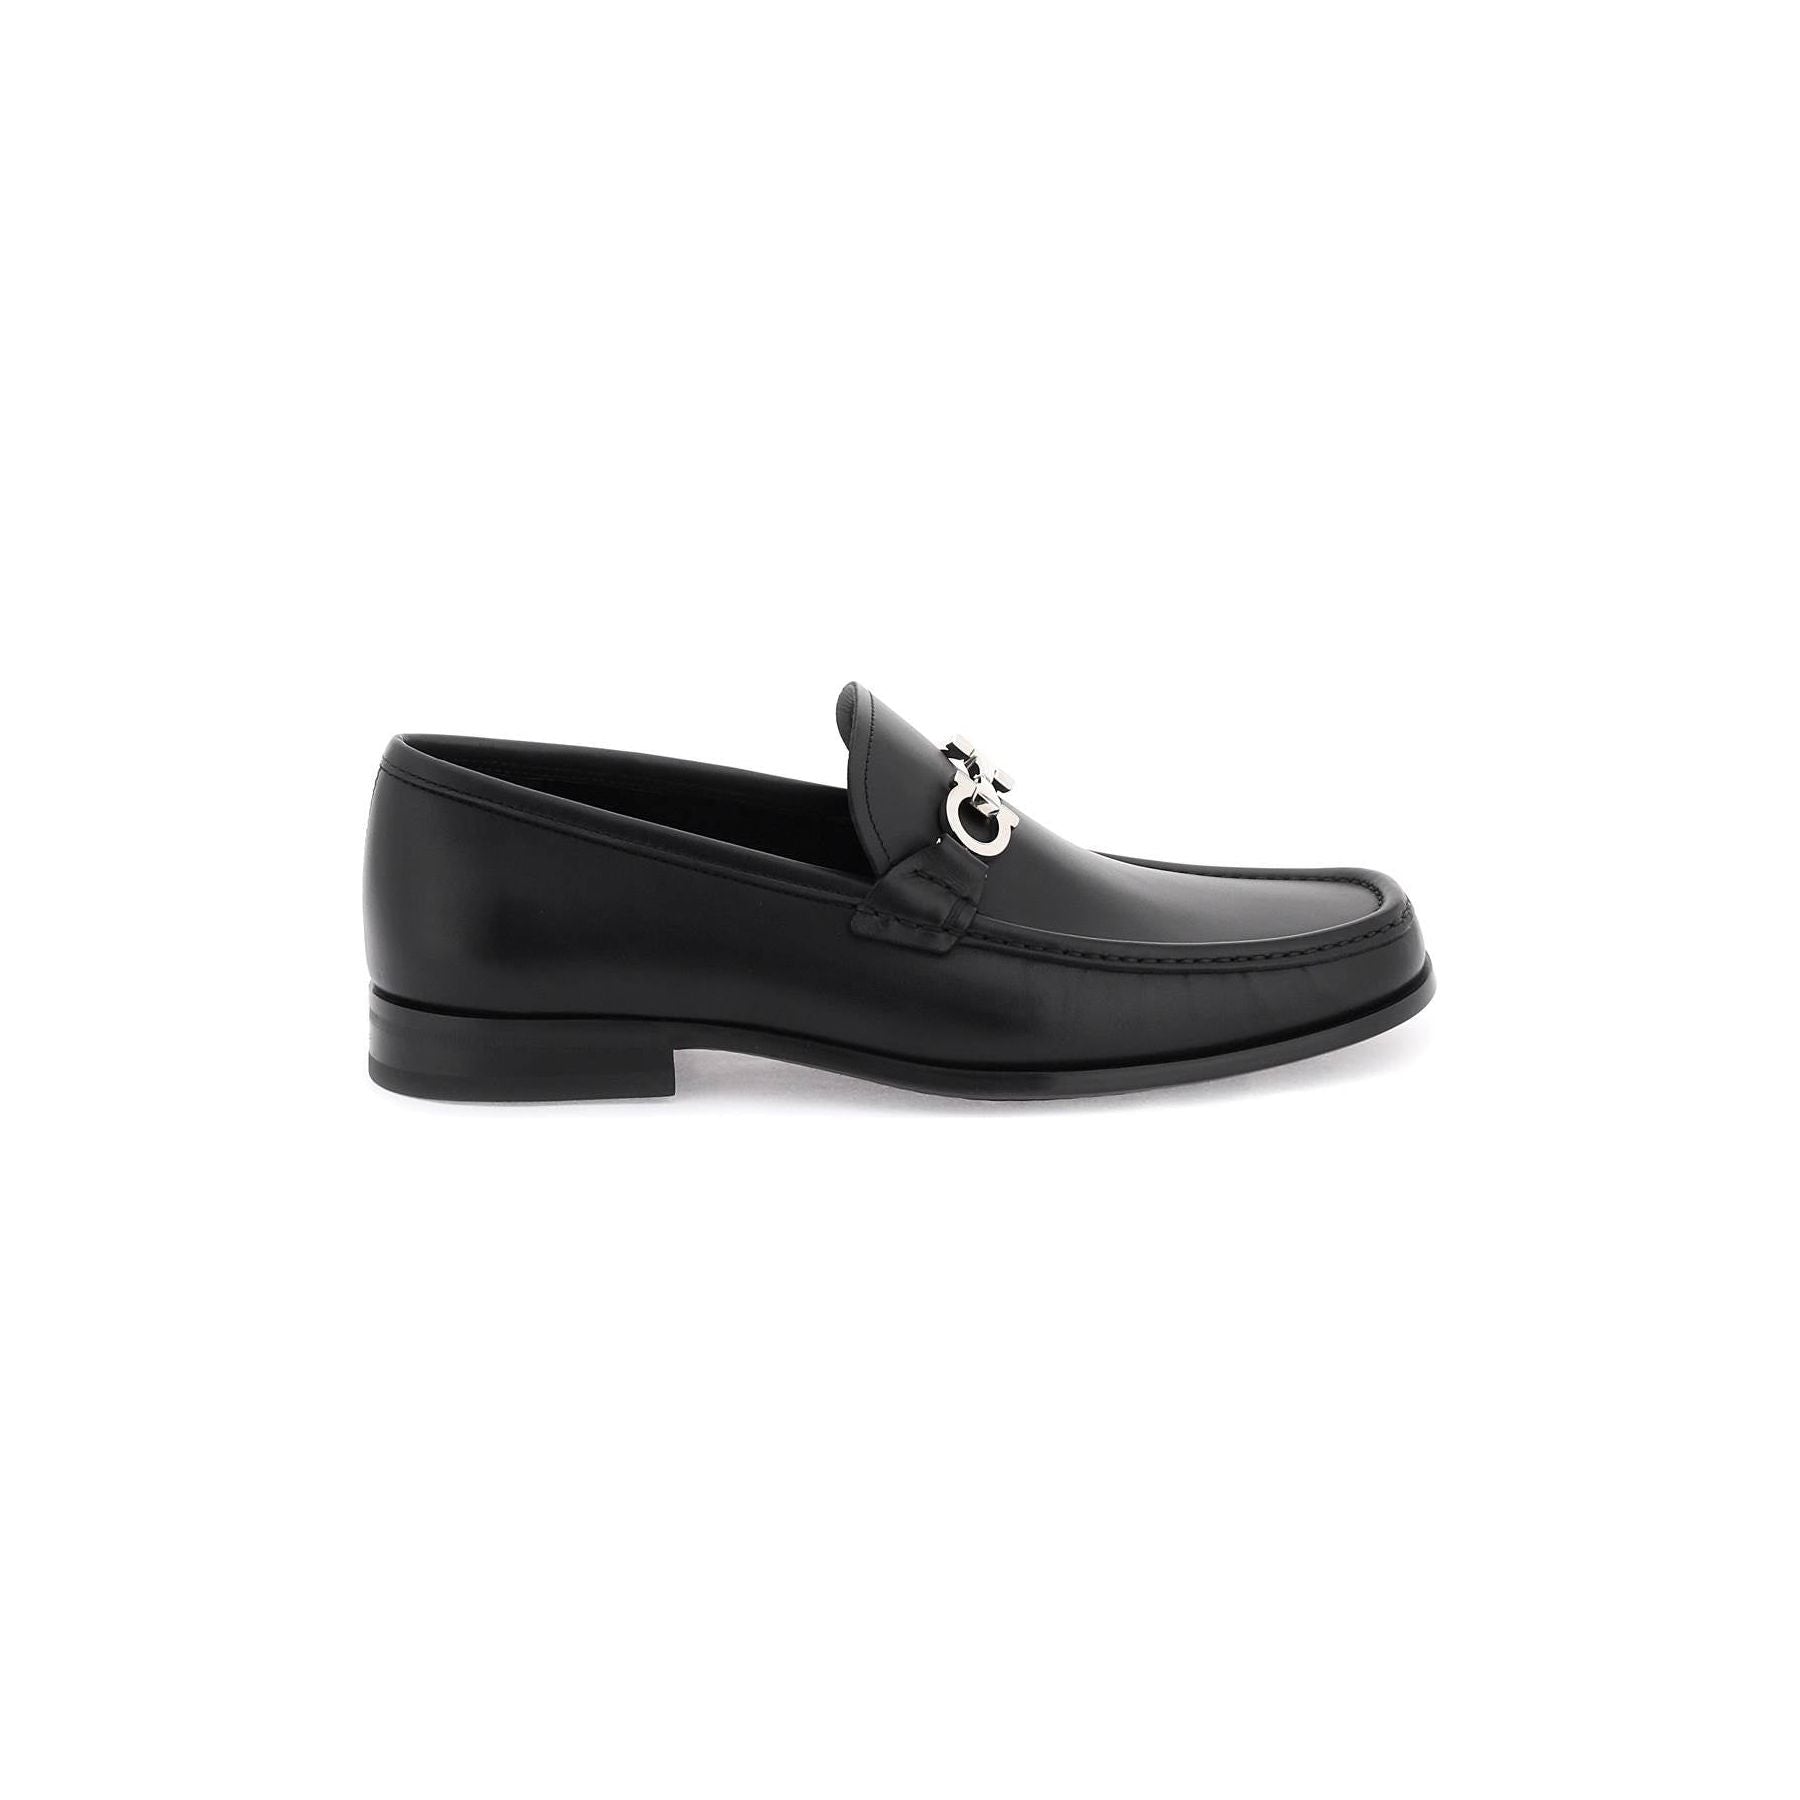 Chris Gancini Leather Loafers